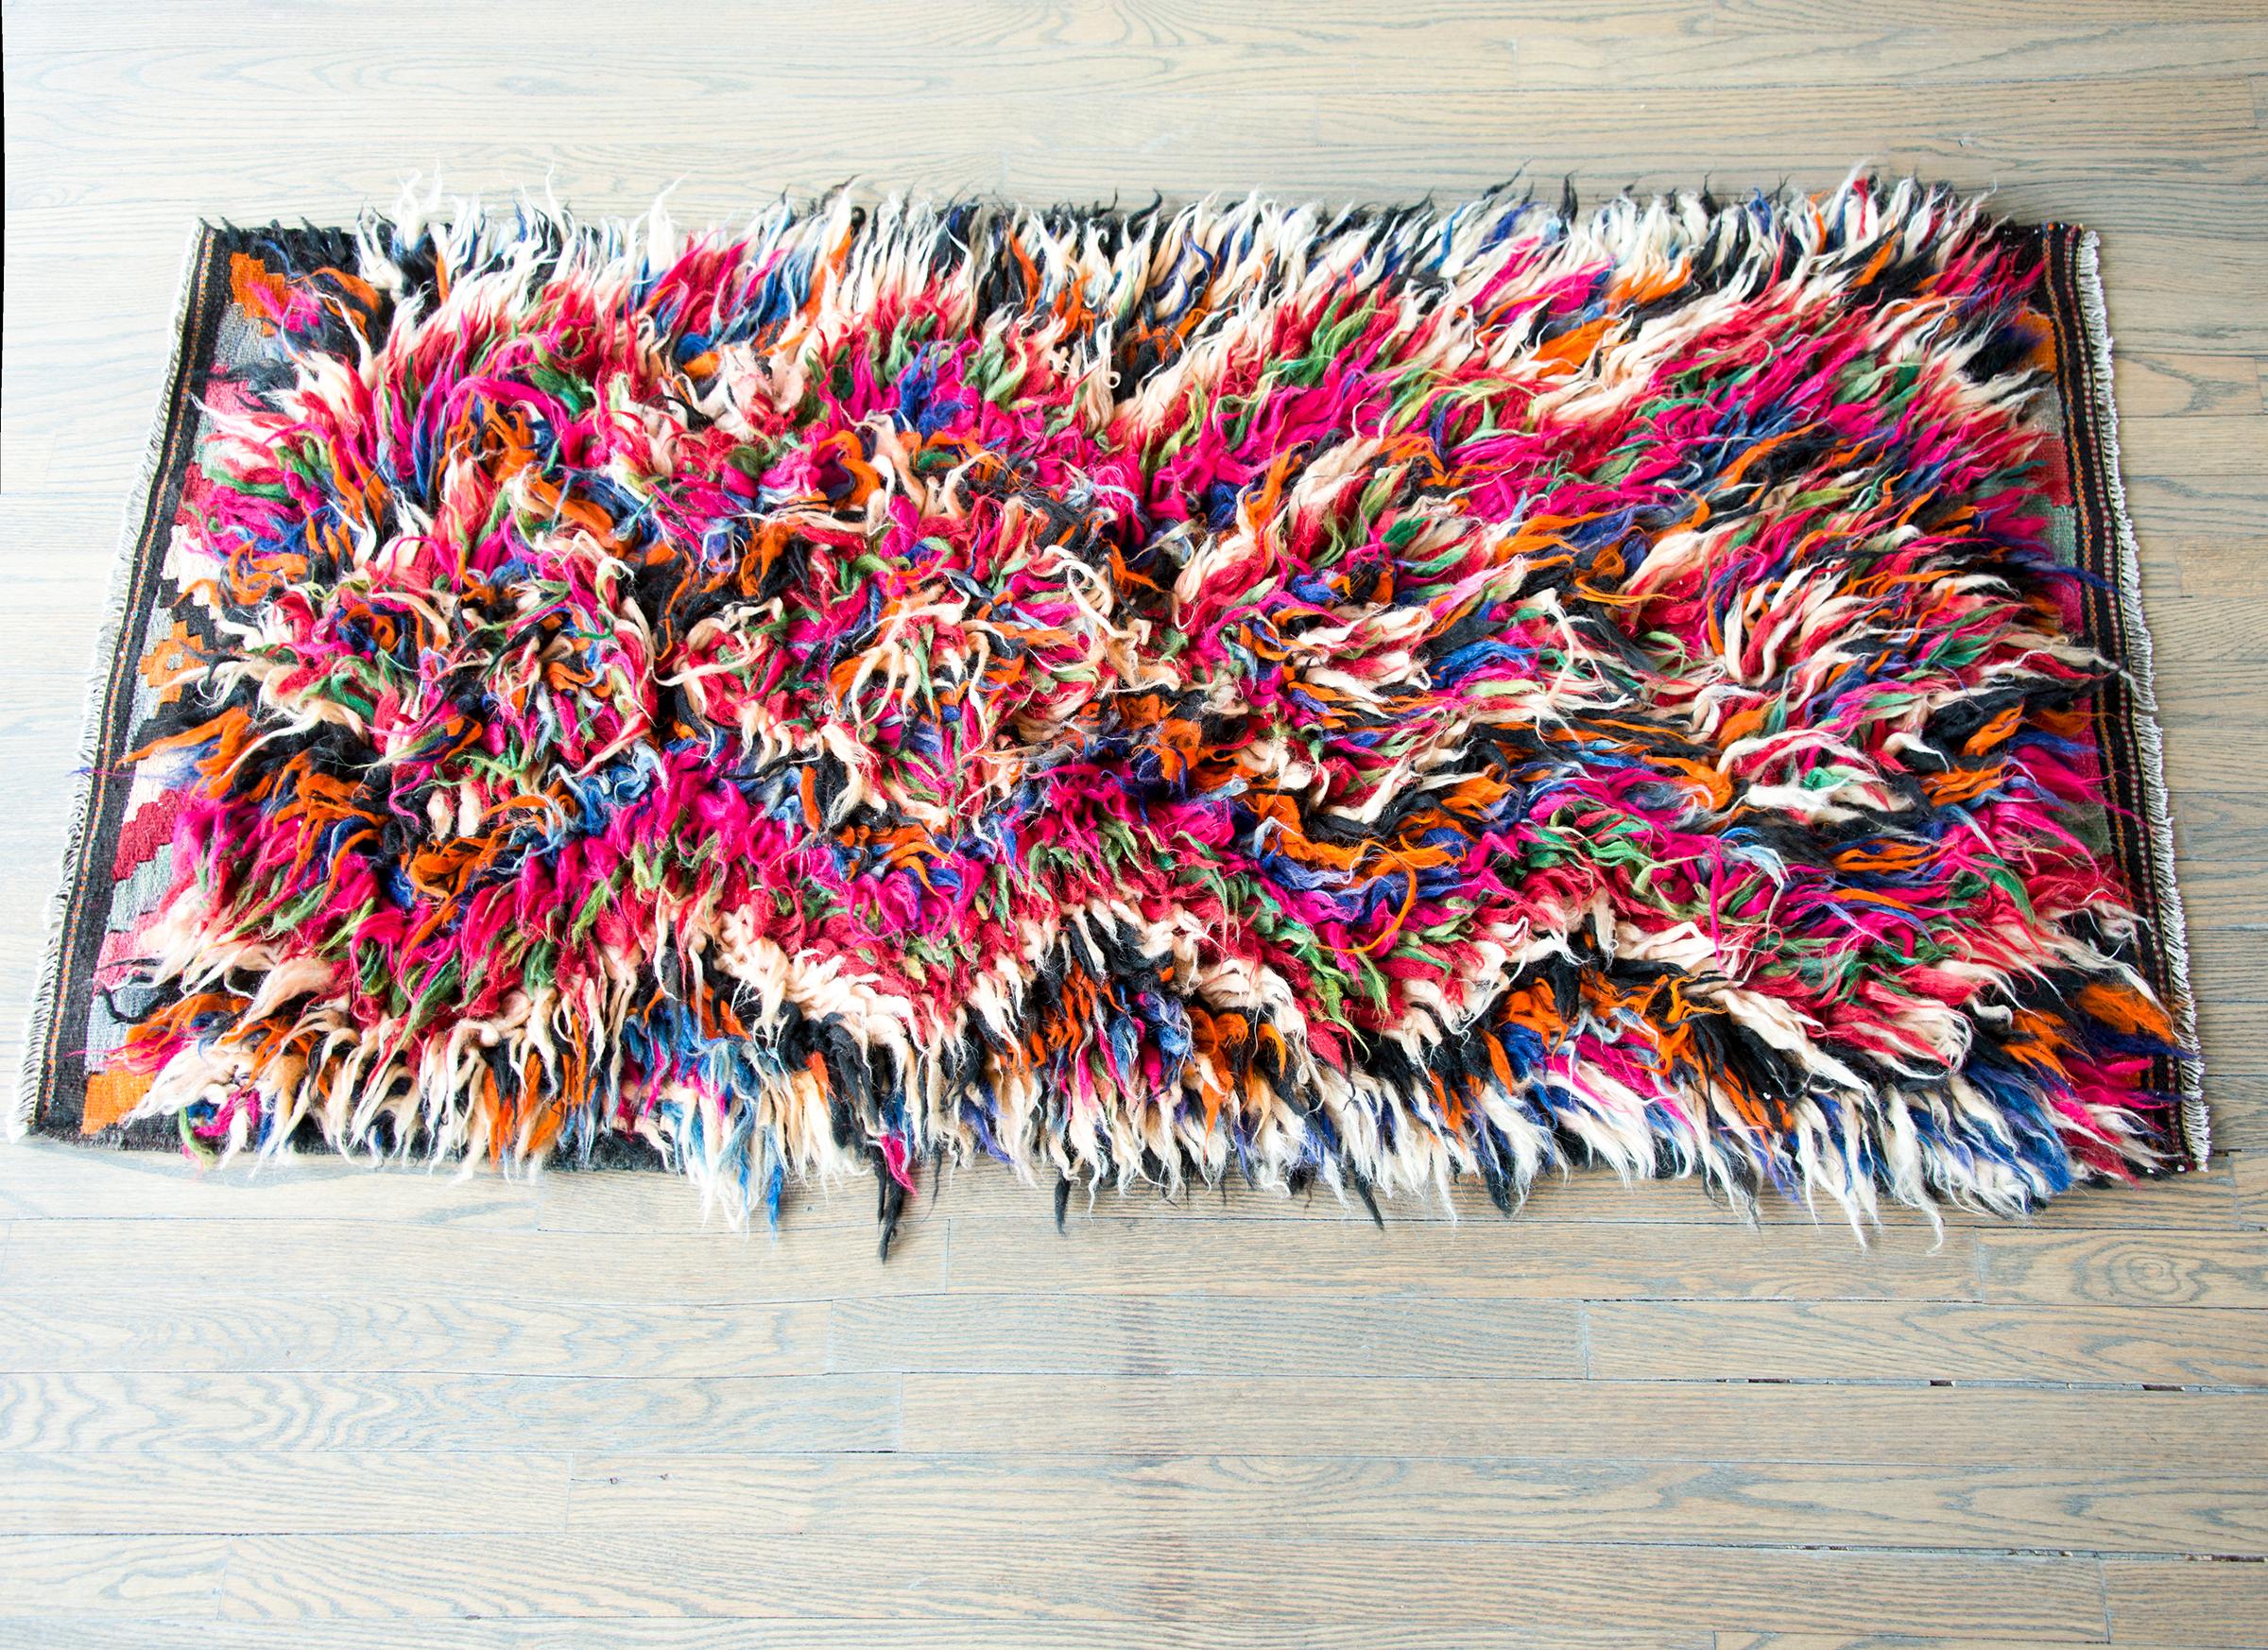 A striking mid-20th century Persian tulu rug with a fabulous shaggy wool diamond pattern woven in brilliant pinks, indigos, greens, oranges, and white wool.